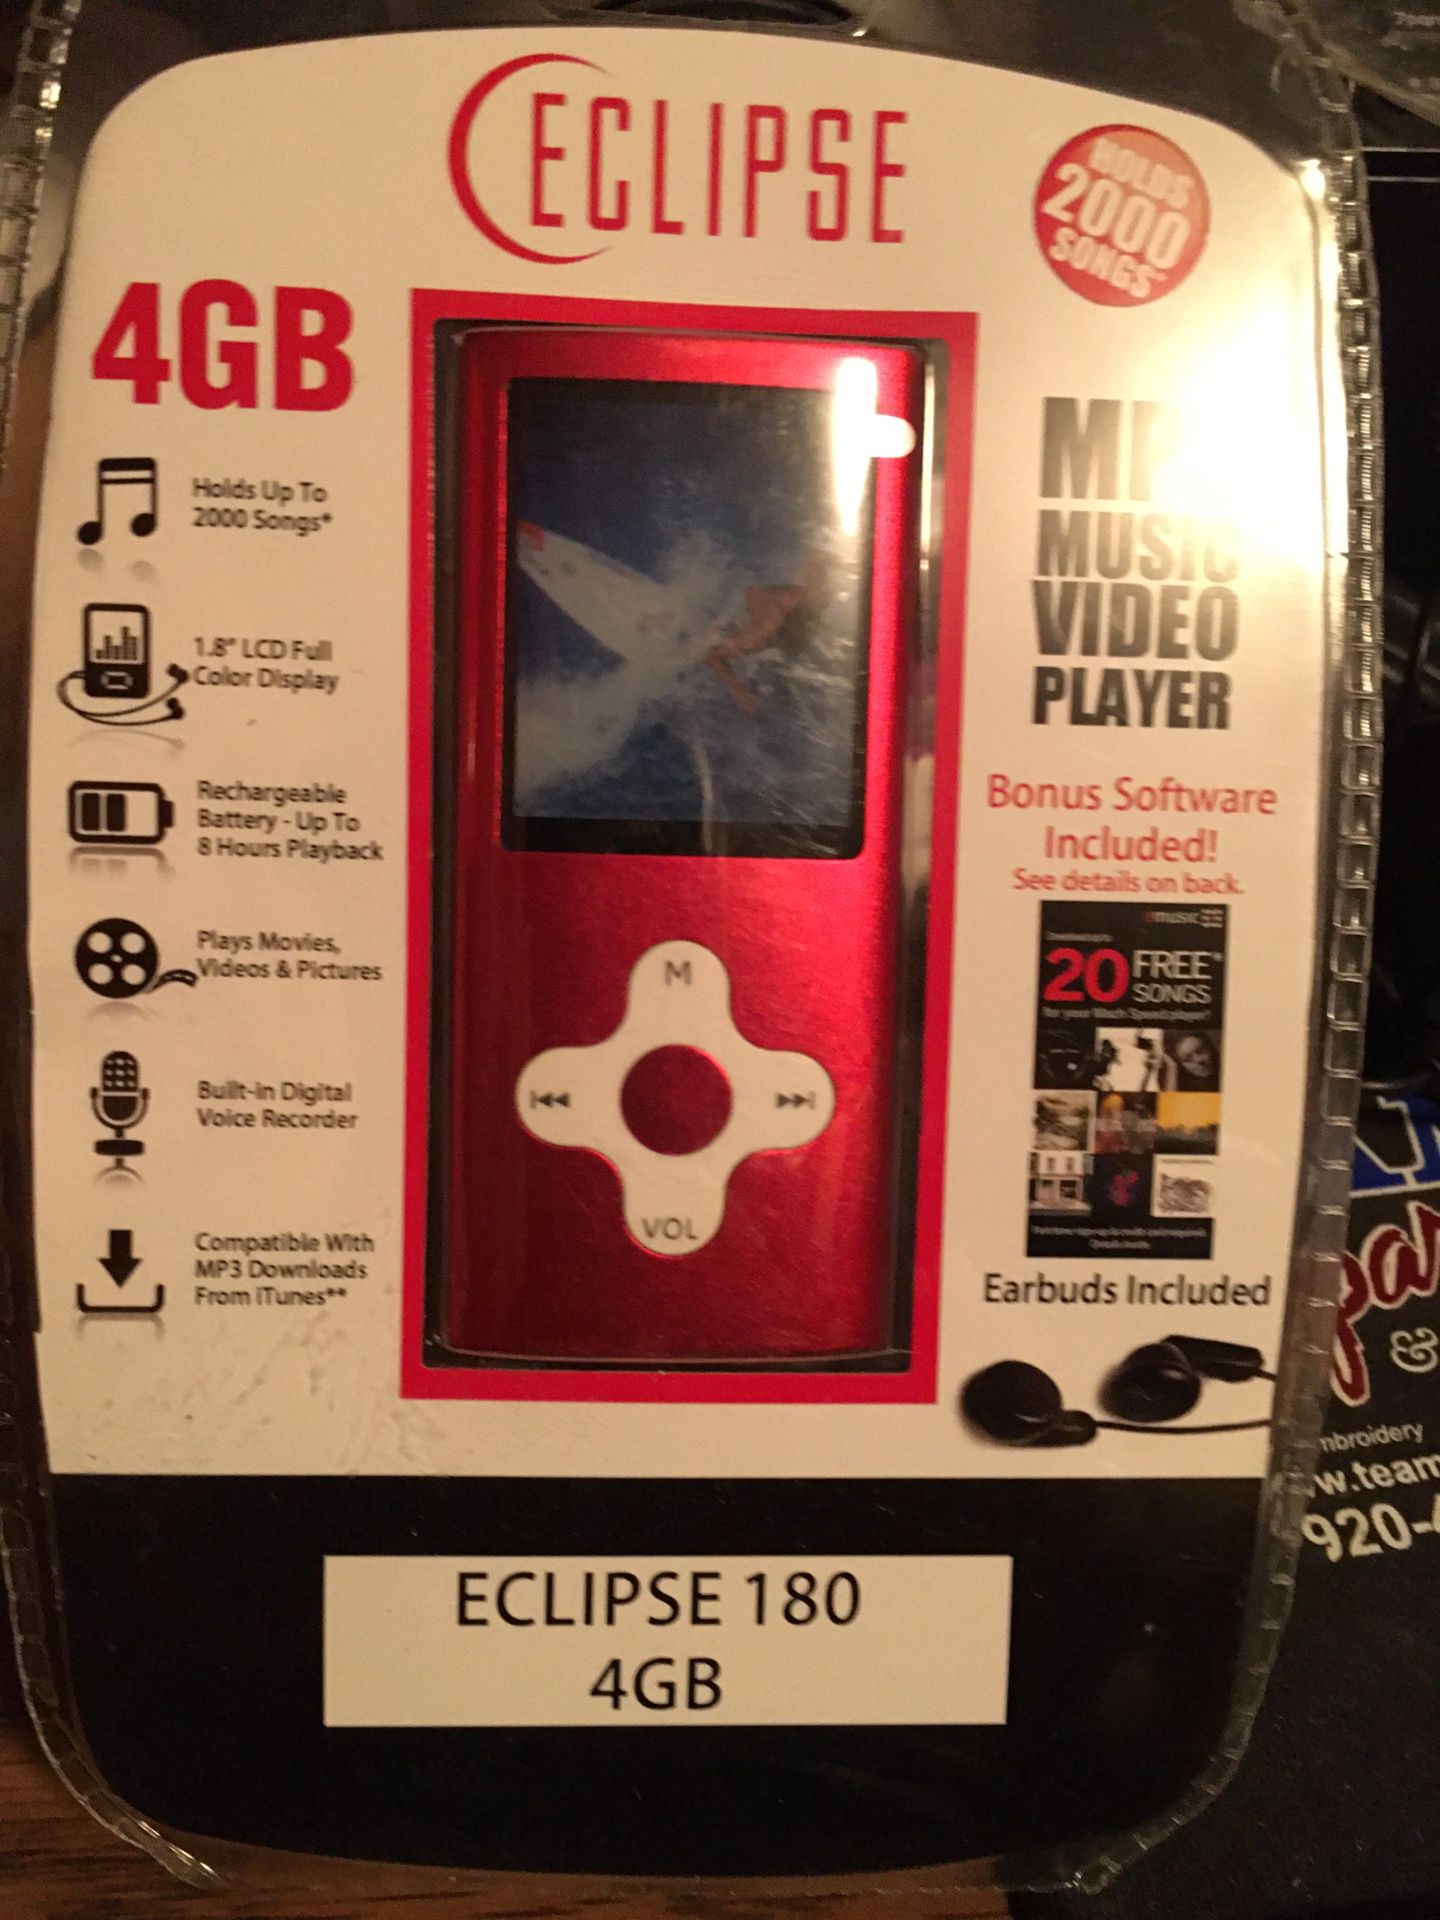 Eclipse mp3 player